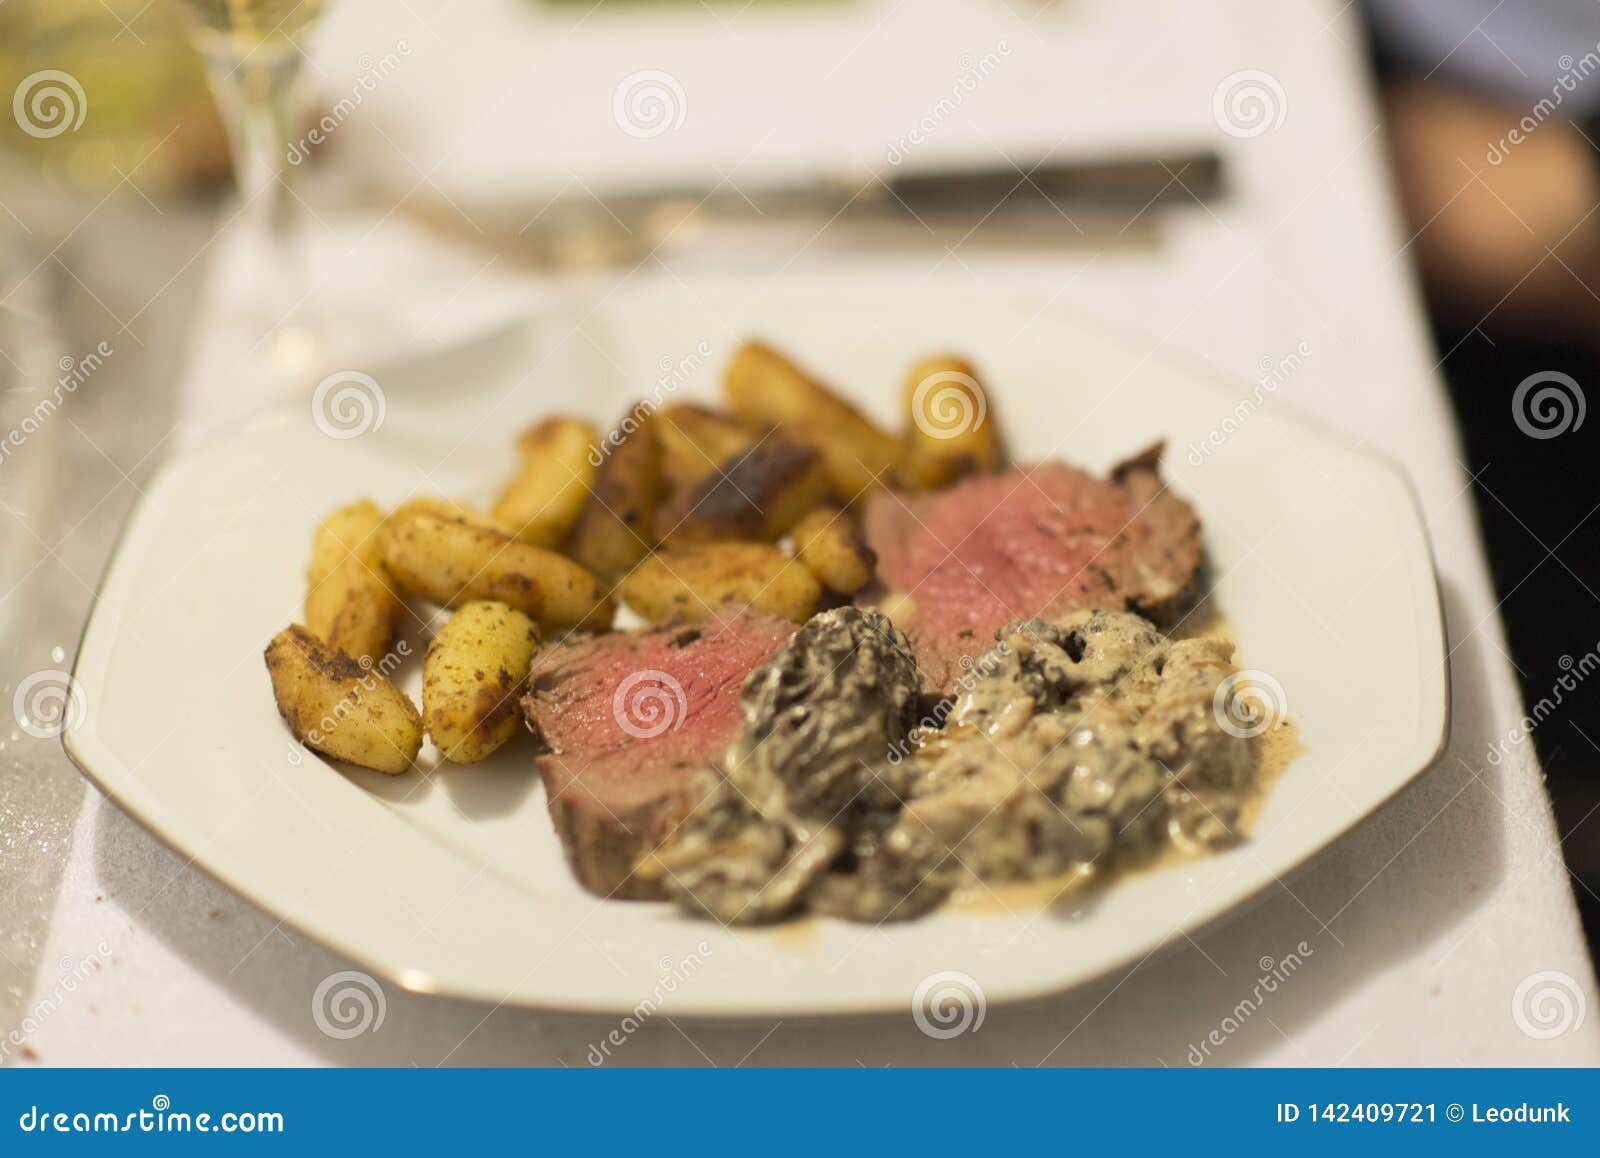 Beef Tenderloin Morels And Ratte Potatoes For Christmas Diner French Speciality For Christmas Stock Image Image Of Speciality Gourmet 142409721